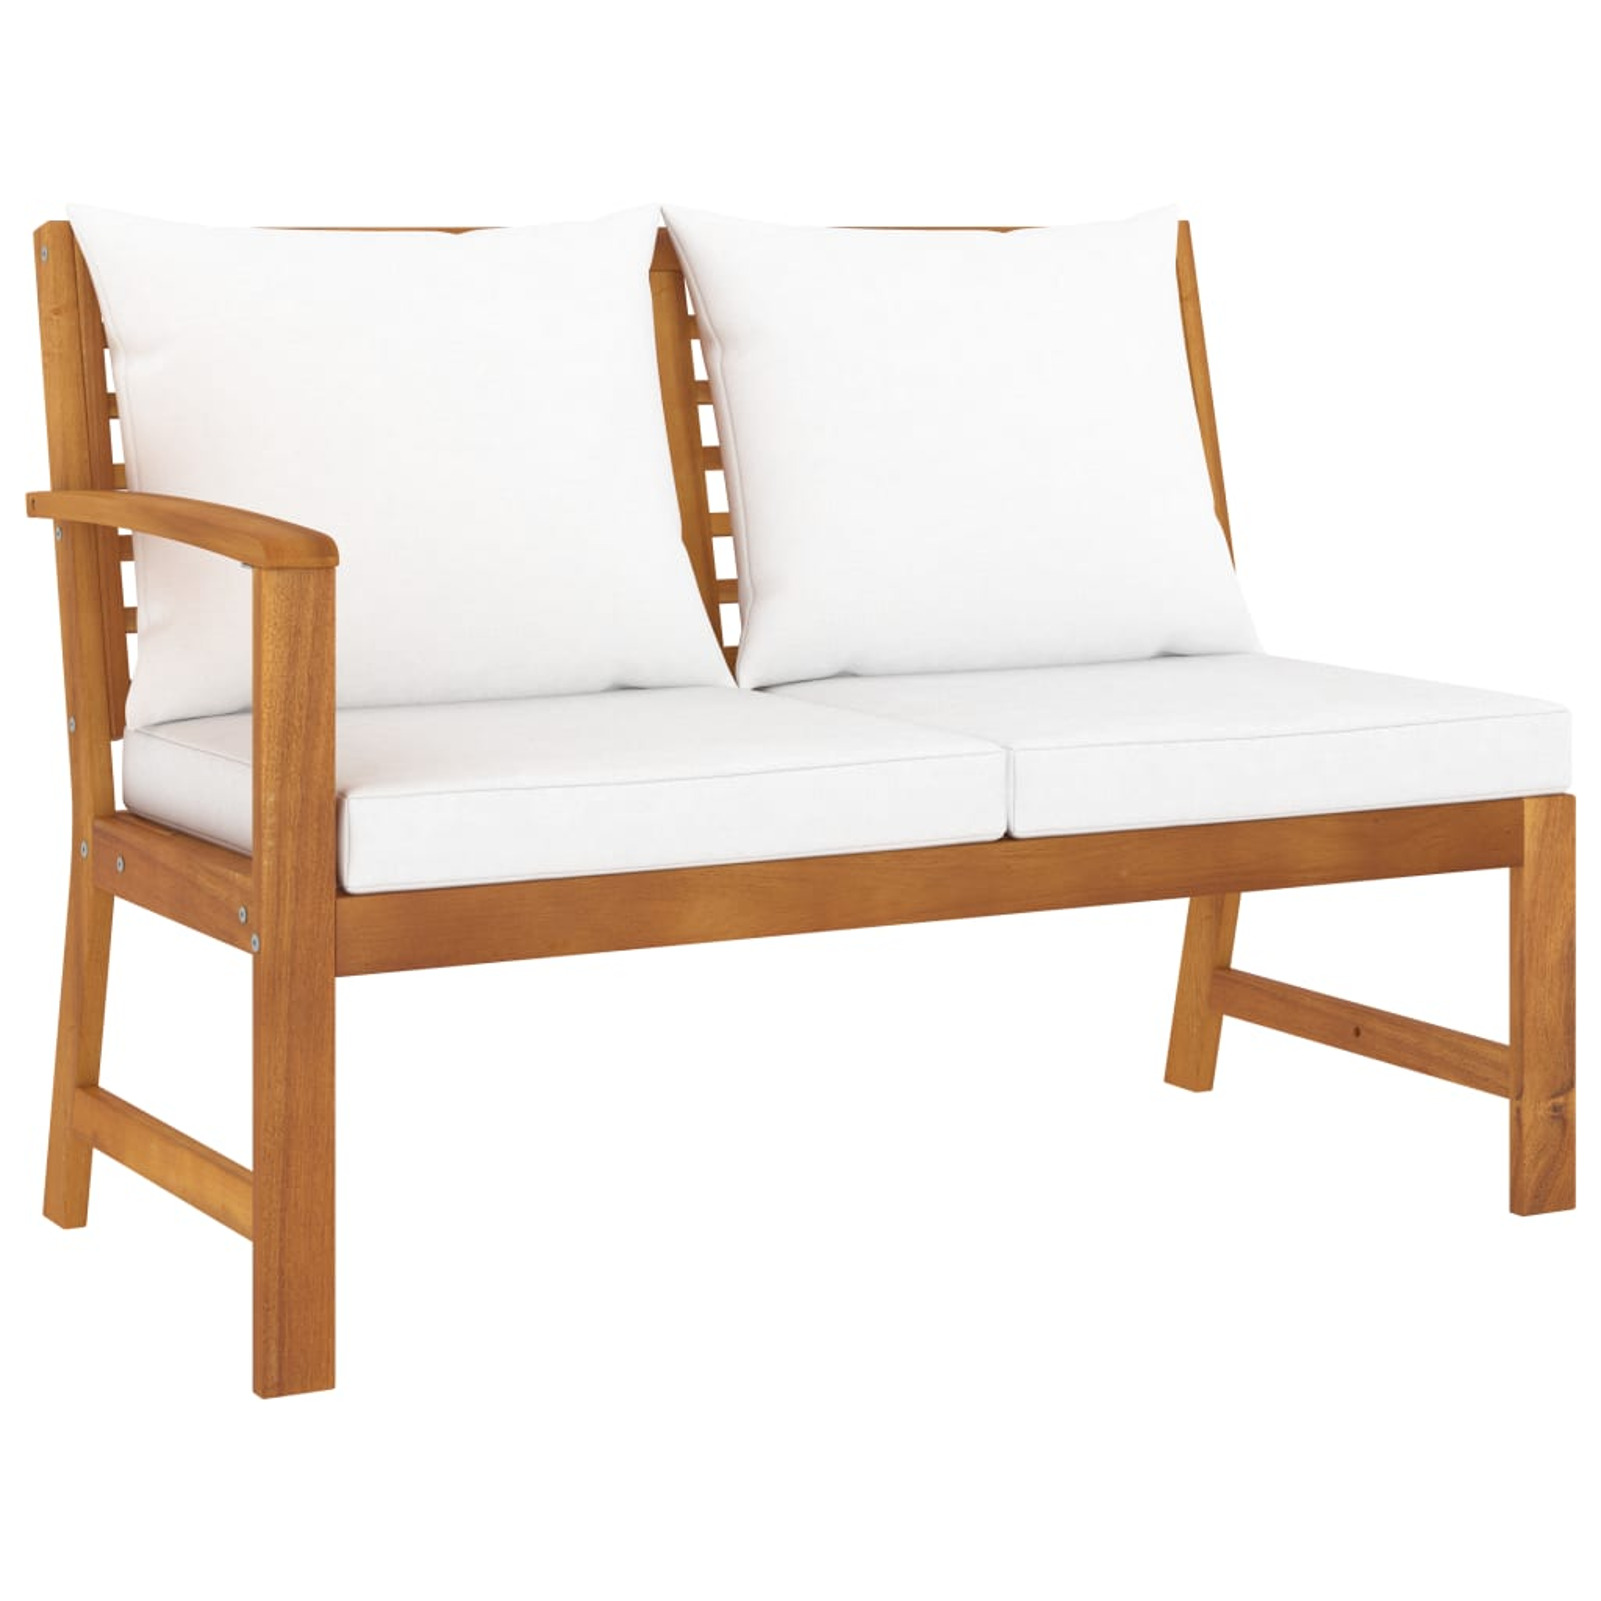 Carevas Patio Bench 45.1" with Cushion Solid Acacia Wood - image 1 of 6